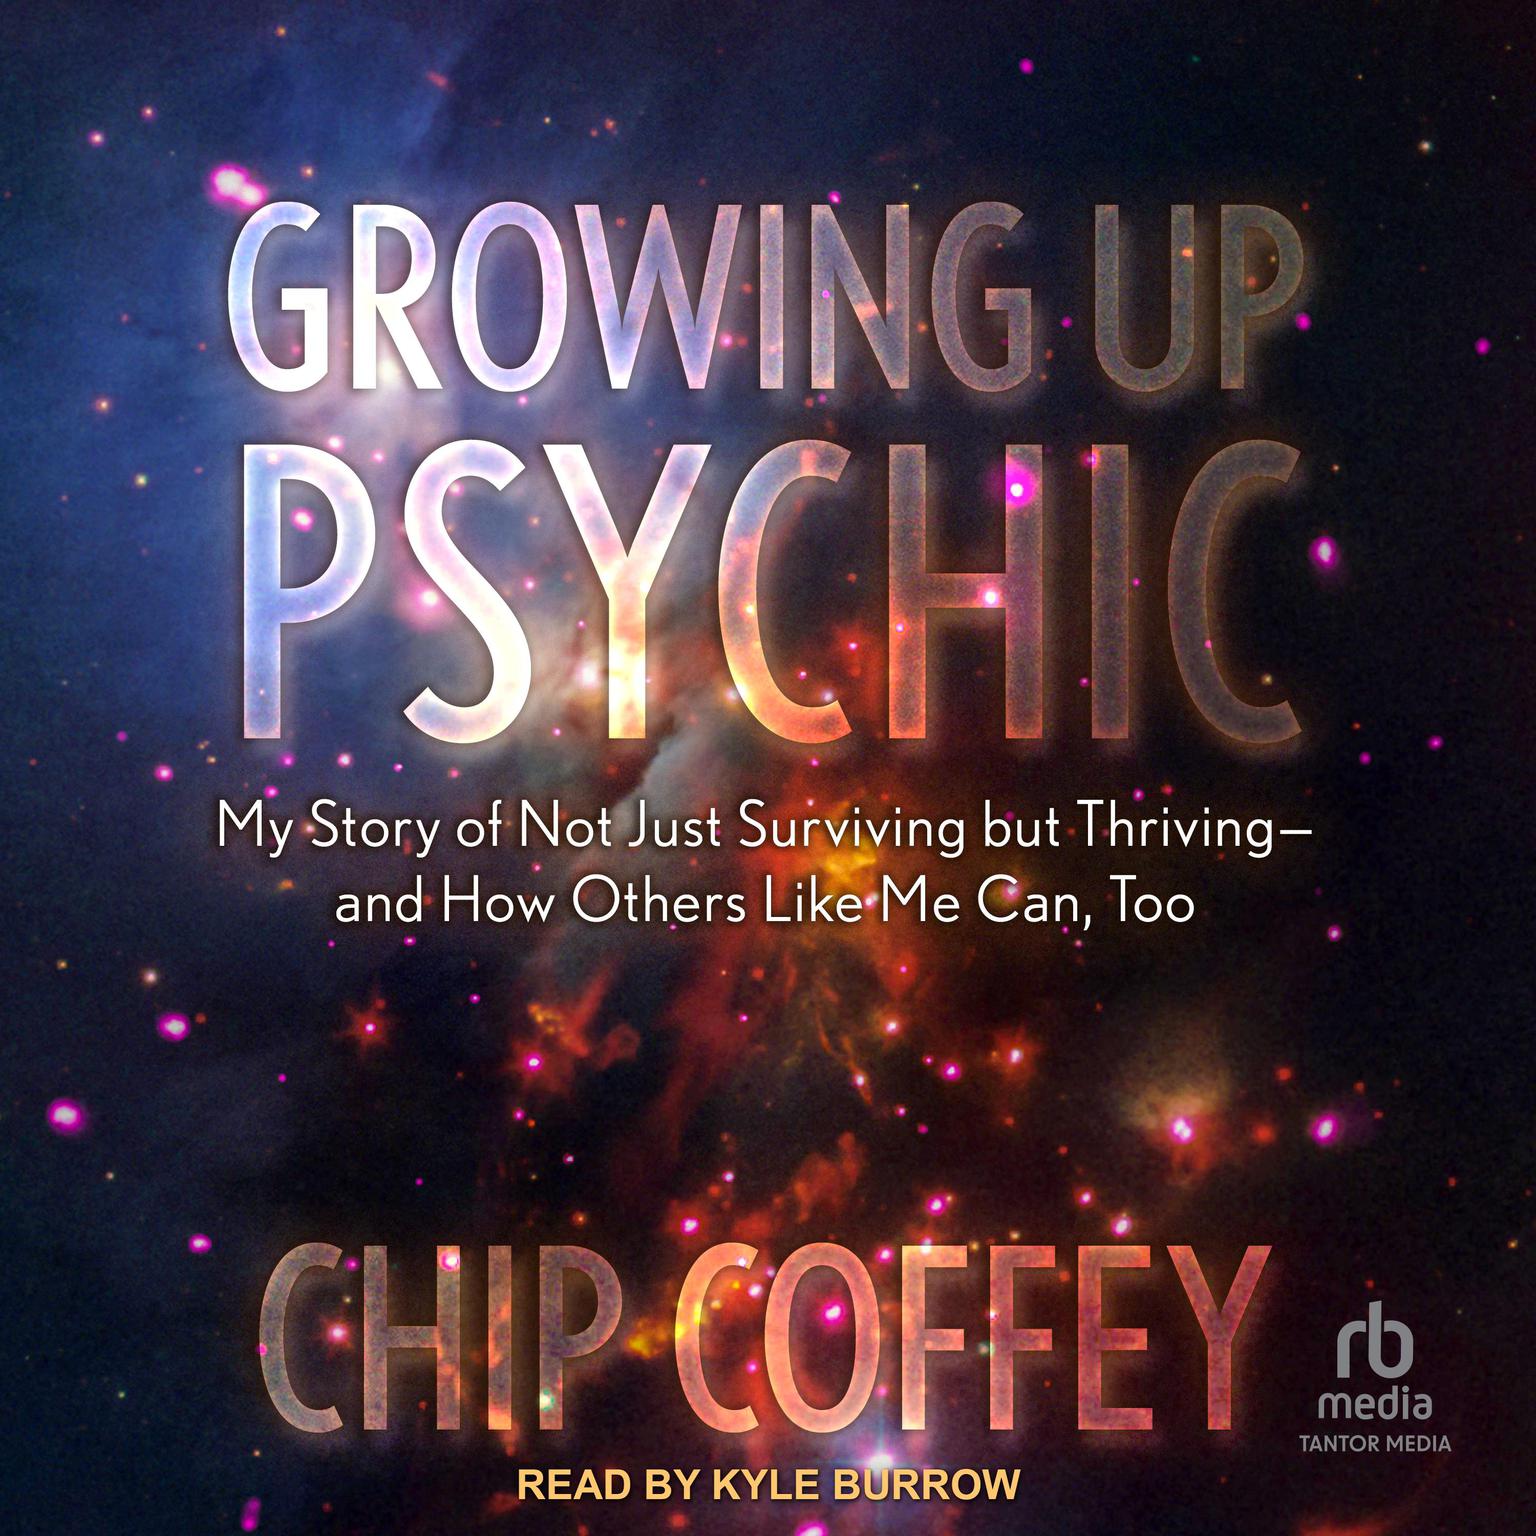 Growing Up Psychic: My Story of Not Just Surviving but Thriving and How Others Like Me Can, Too Audiobook, by Chip Coffey